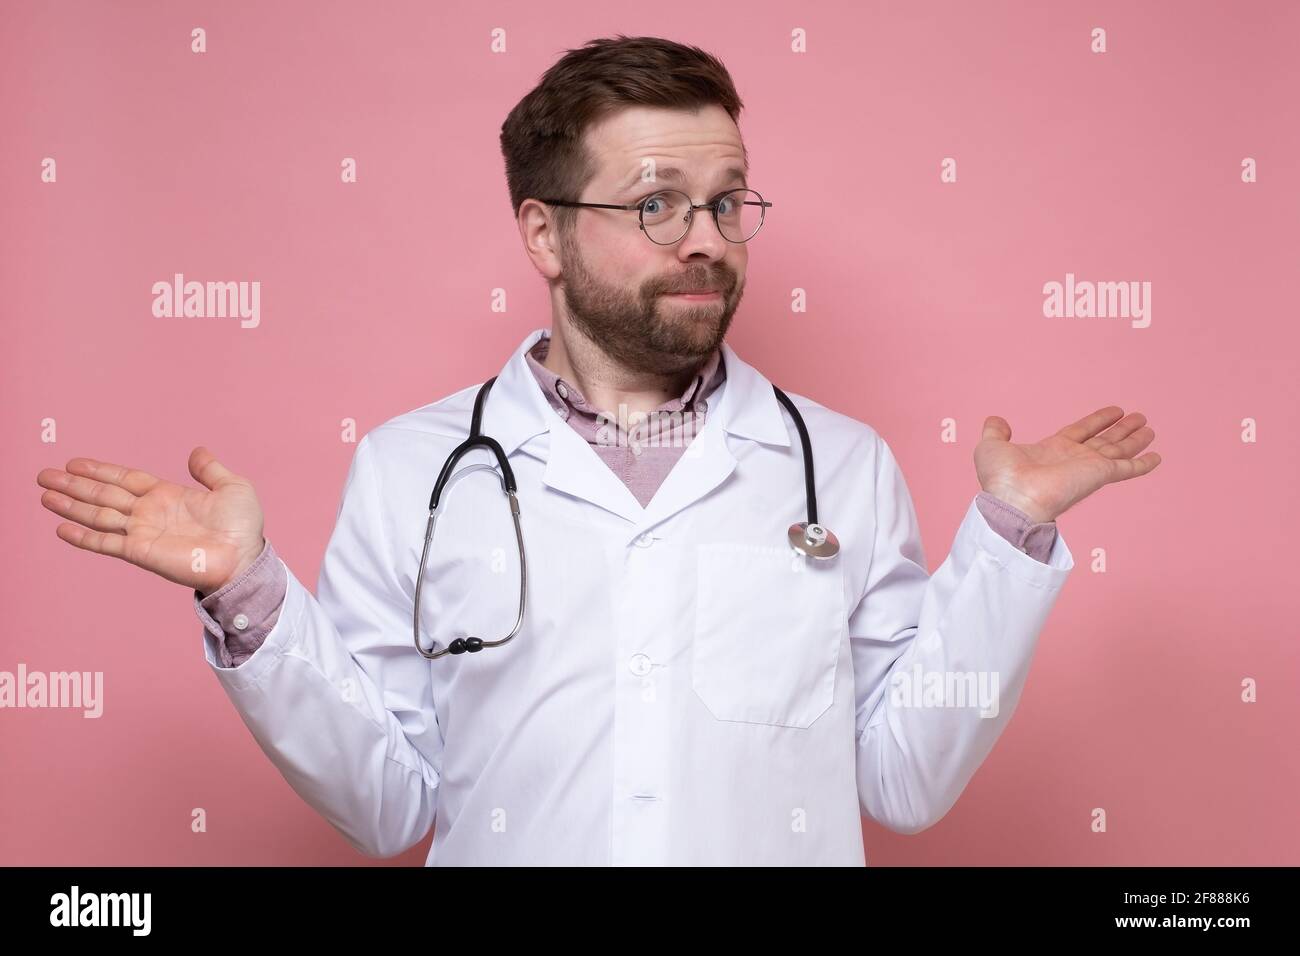 Surprised doctor with a stethoscope around neck innocently spreads hands and looks at the camera. Pink background. Stock Photo